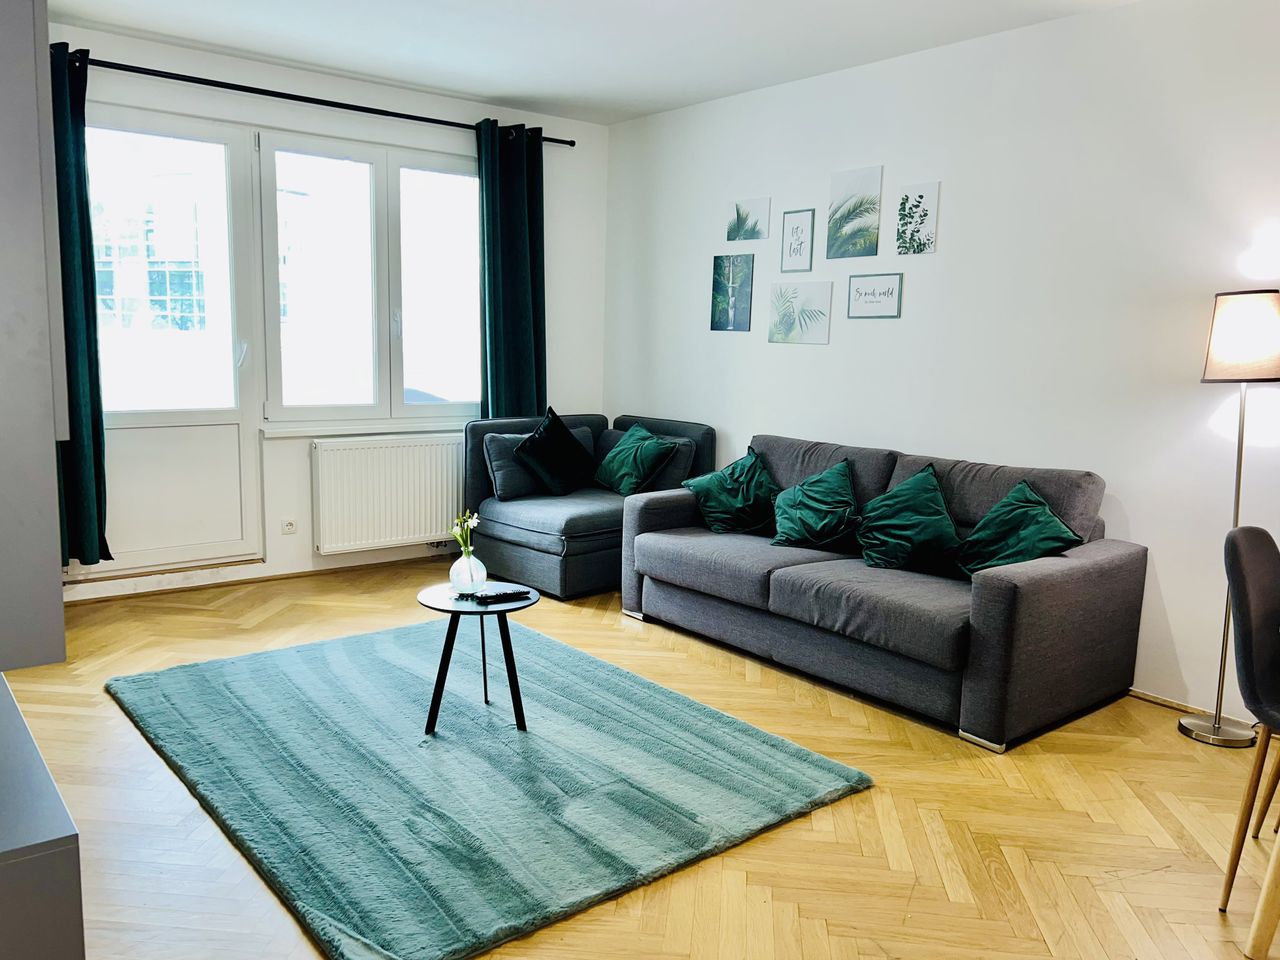 Refurbished dream flat with terrace, U1 Nestroyplatz, just a few steps from the city centre